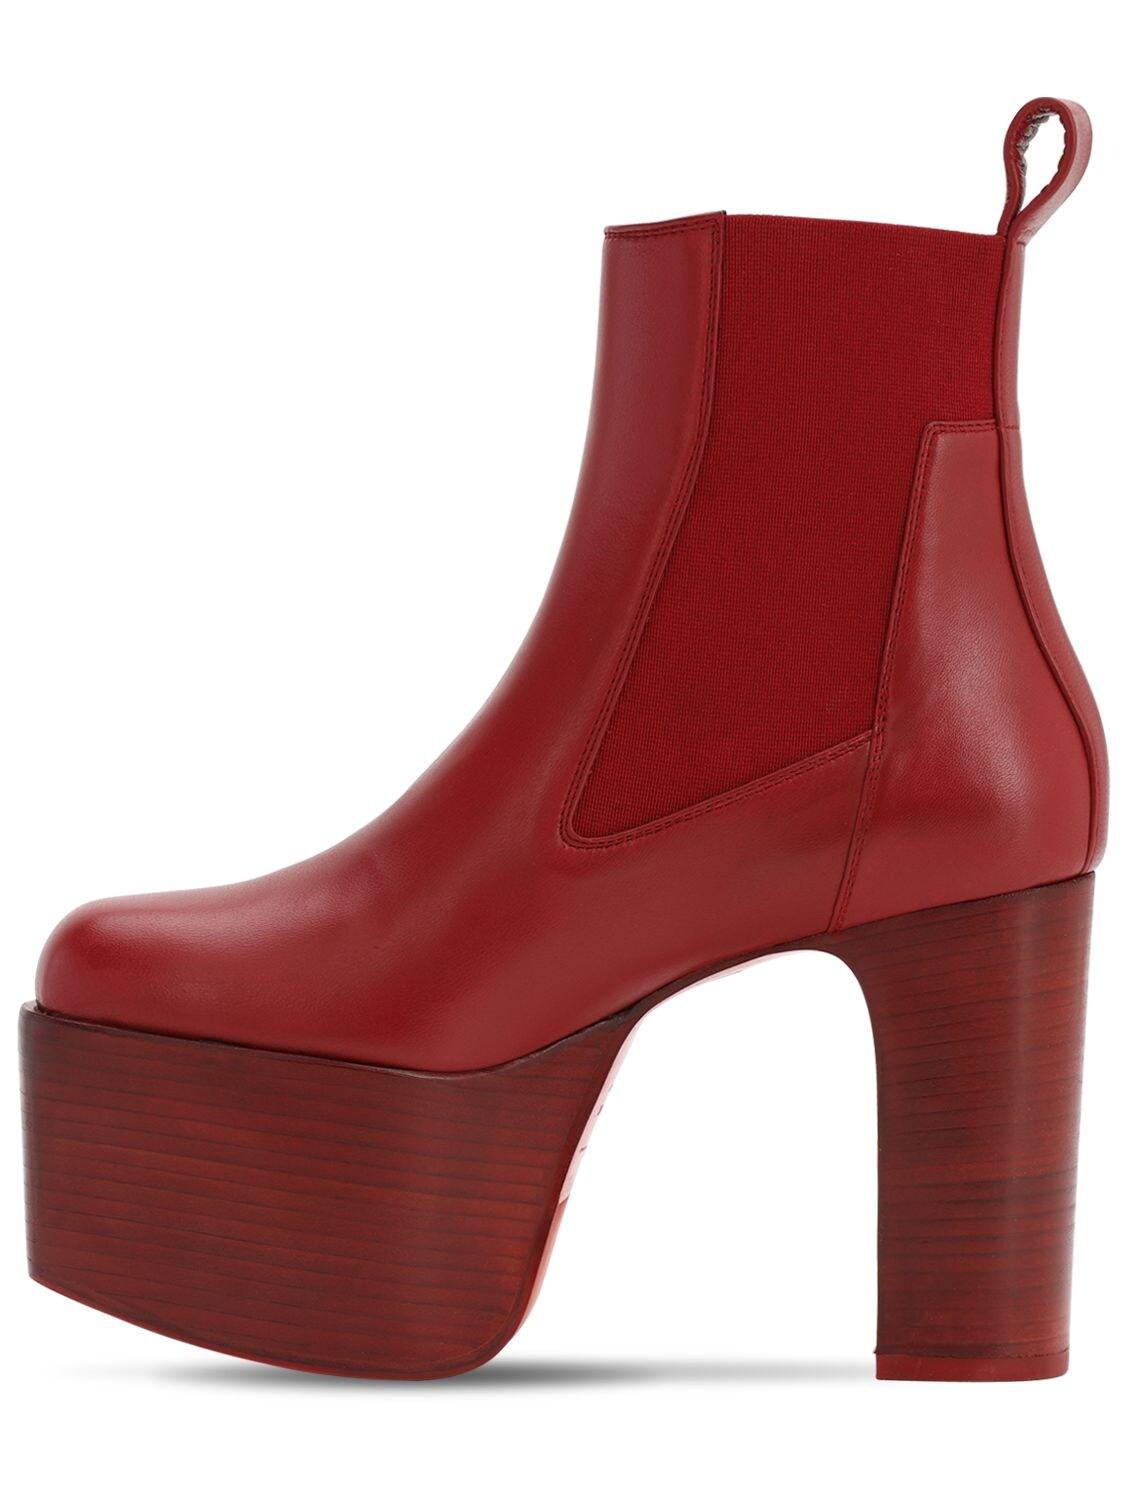 Rick Owens 115mm Kiss Leather Boots W/ Elastic in Red - Lyst